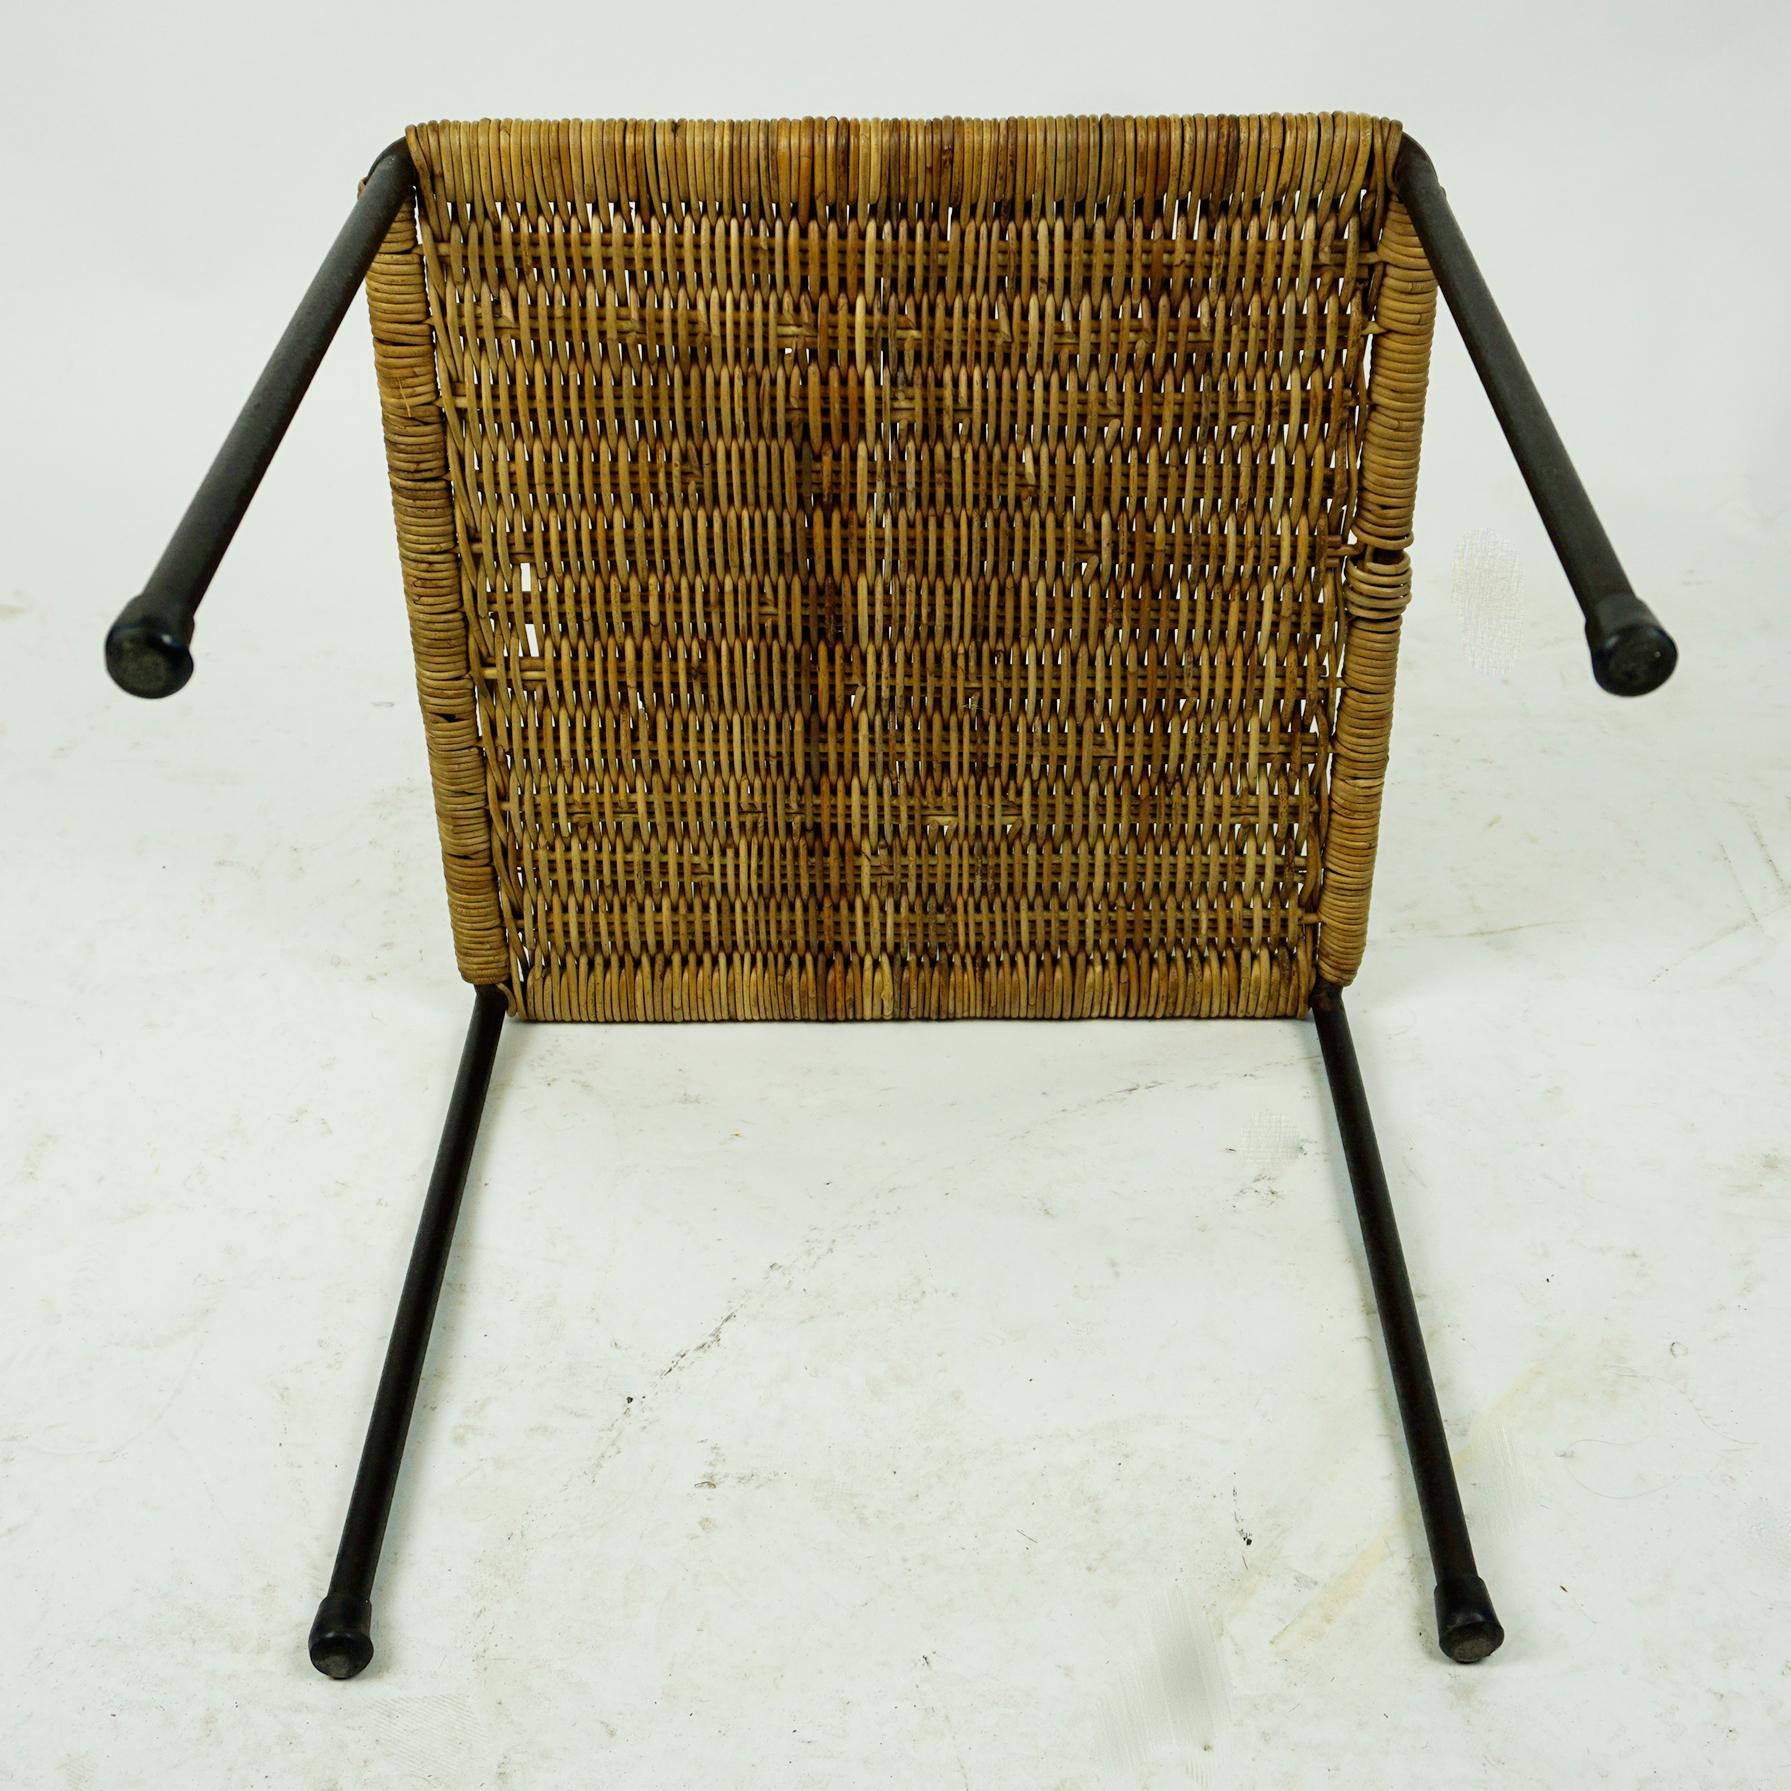 Mid-20th Century Austrian Midcentury Black Steel and Wicker Side Table or Stool by Carl Auböck